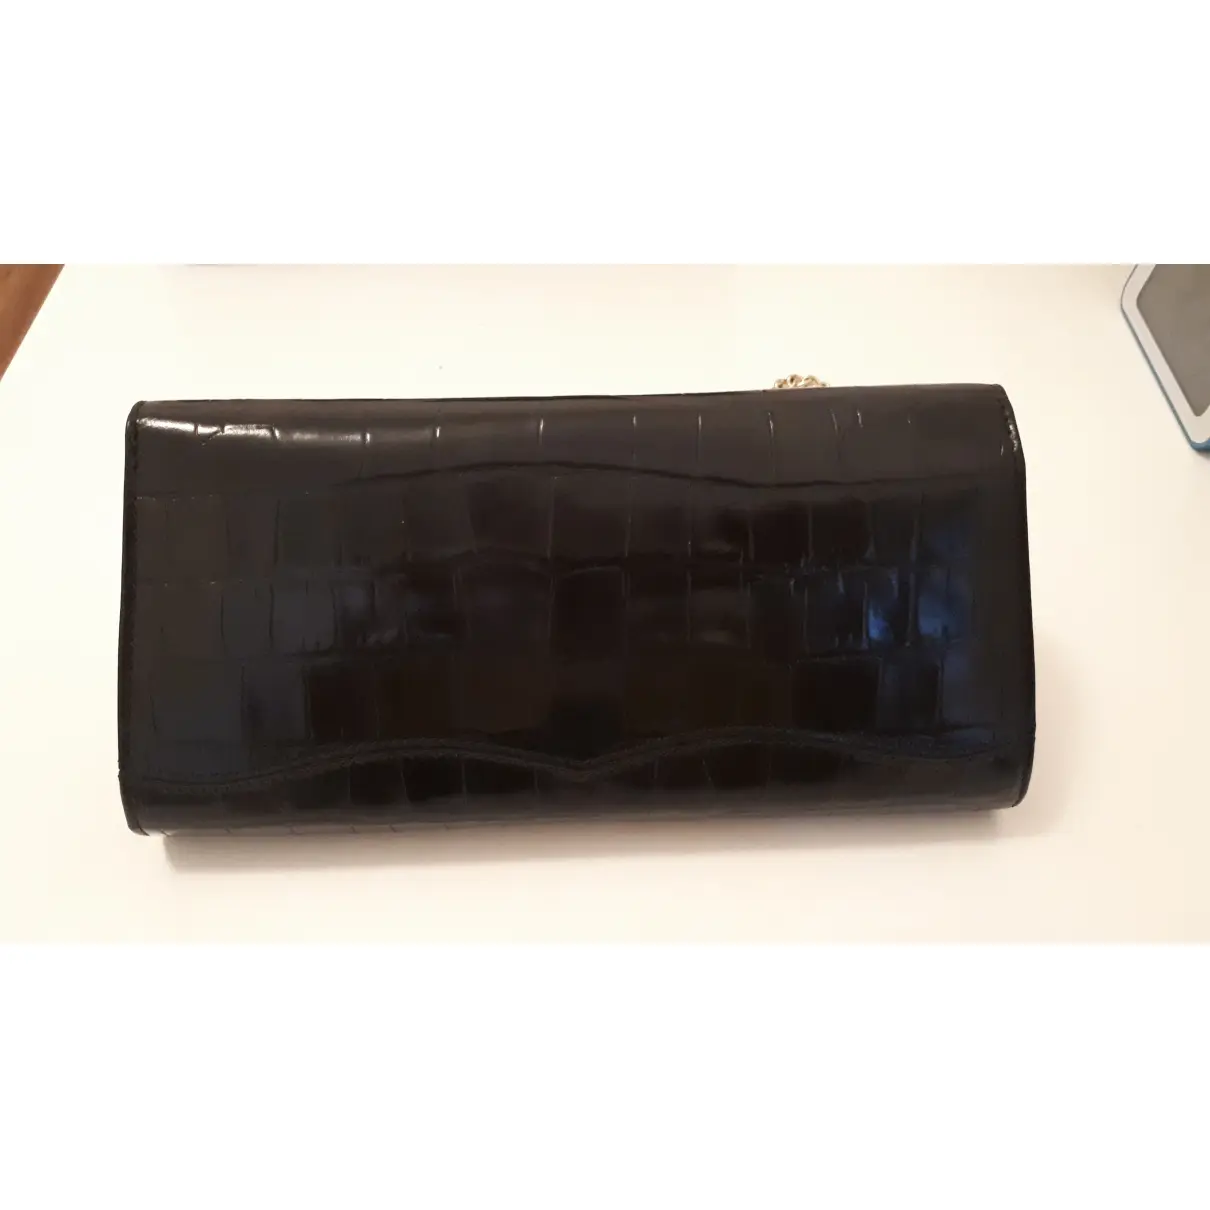 Buy Aspinal Of London Leather clutch bag online